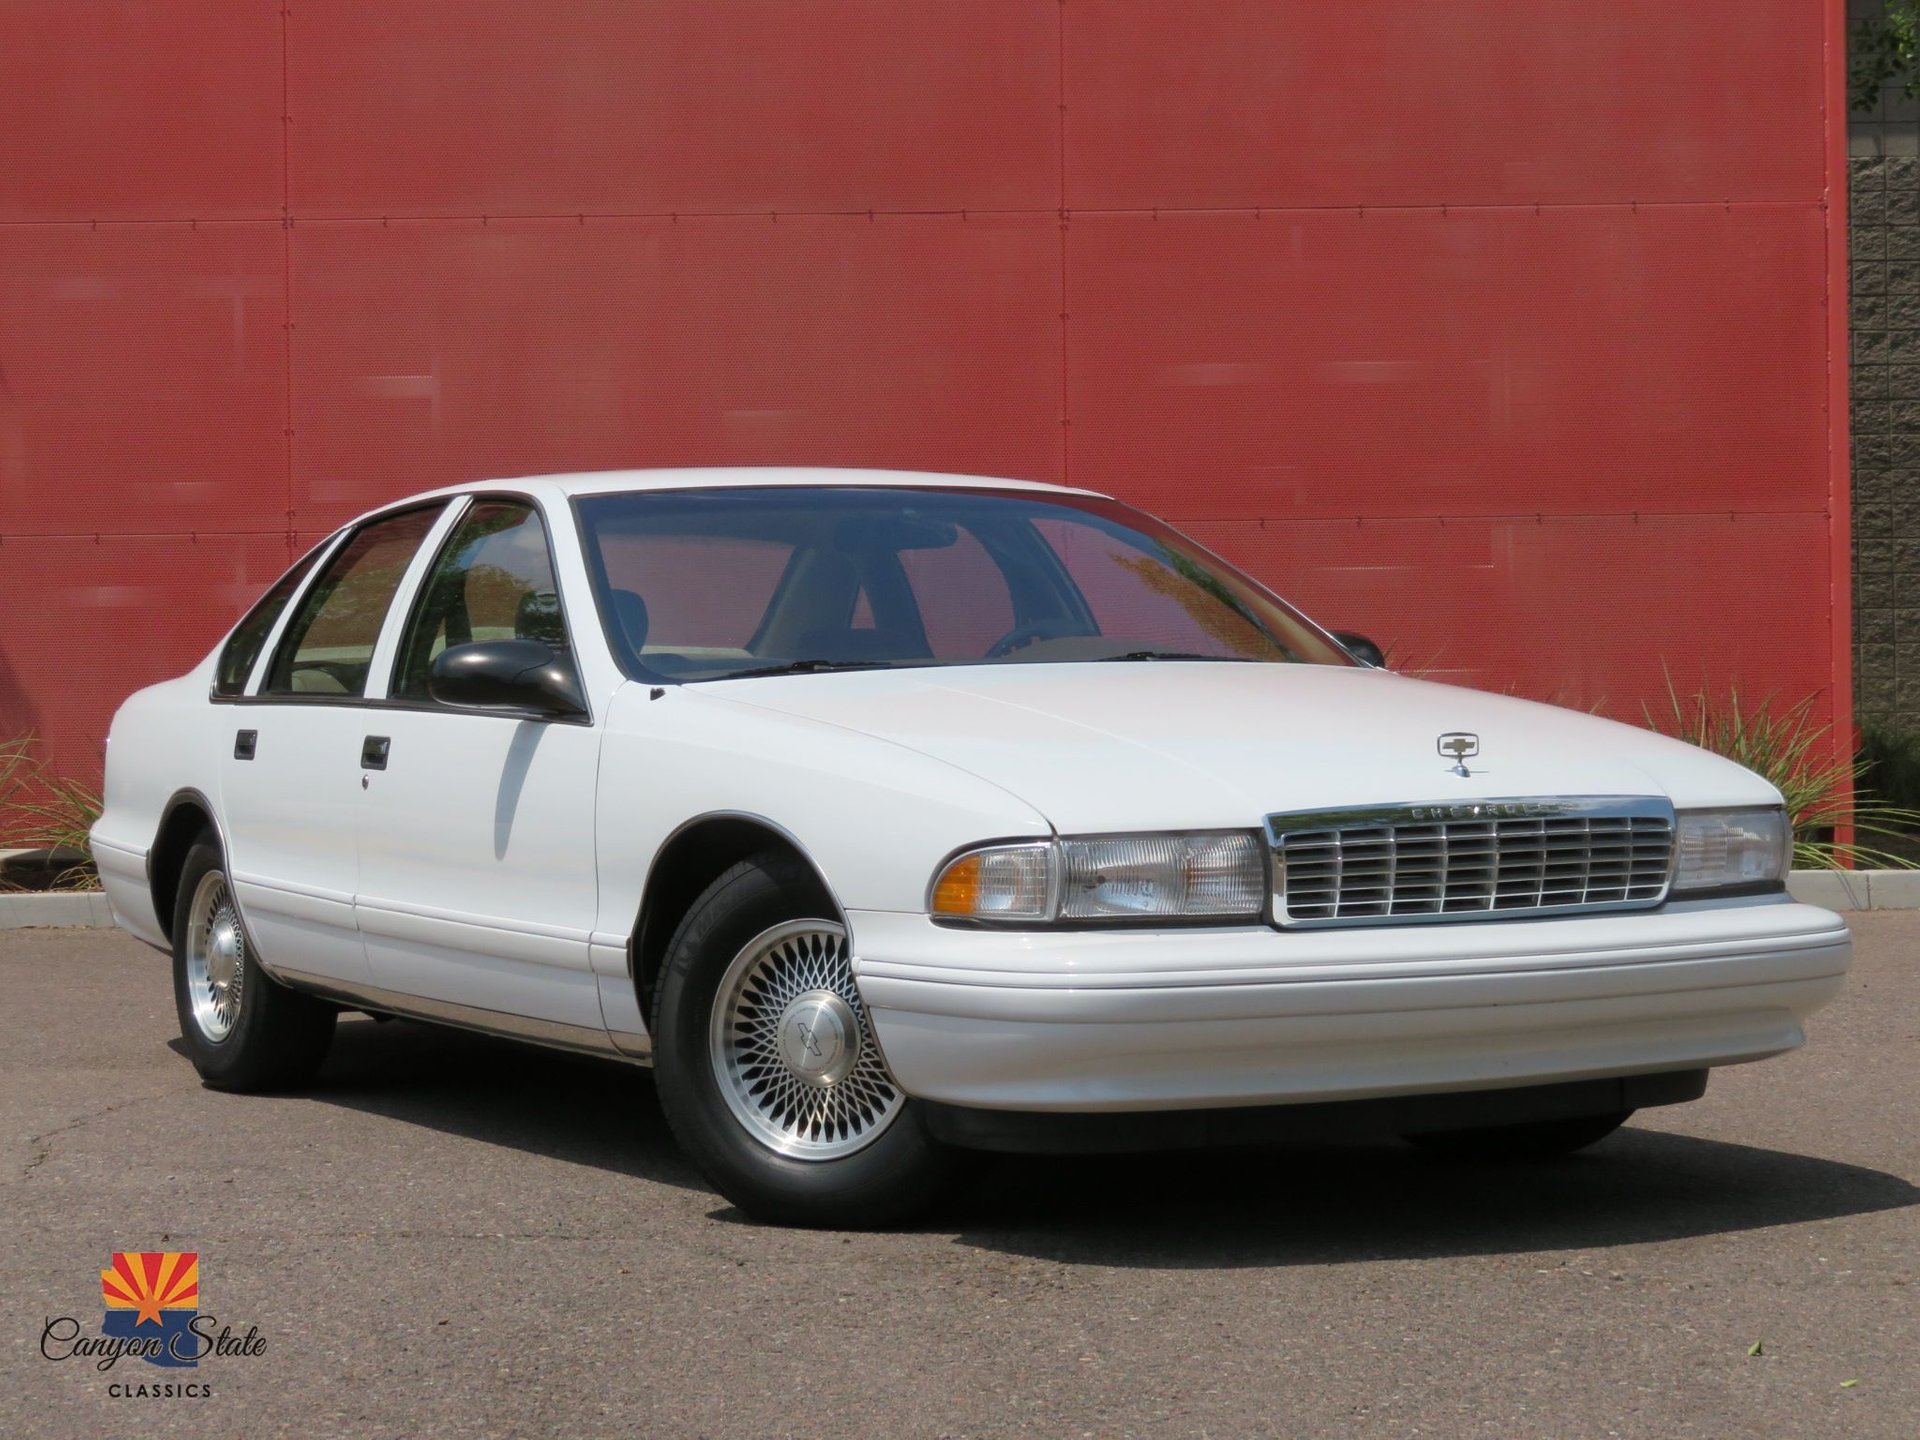 1996 Chevrolet Caprice | Canyon State Classics